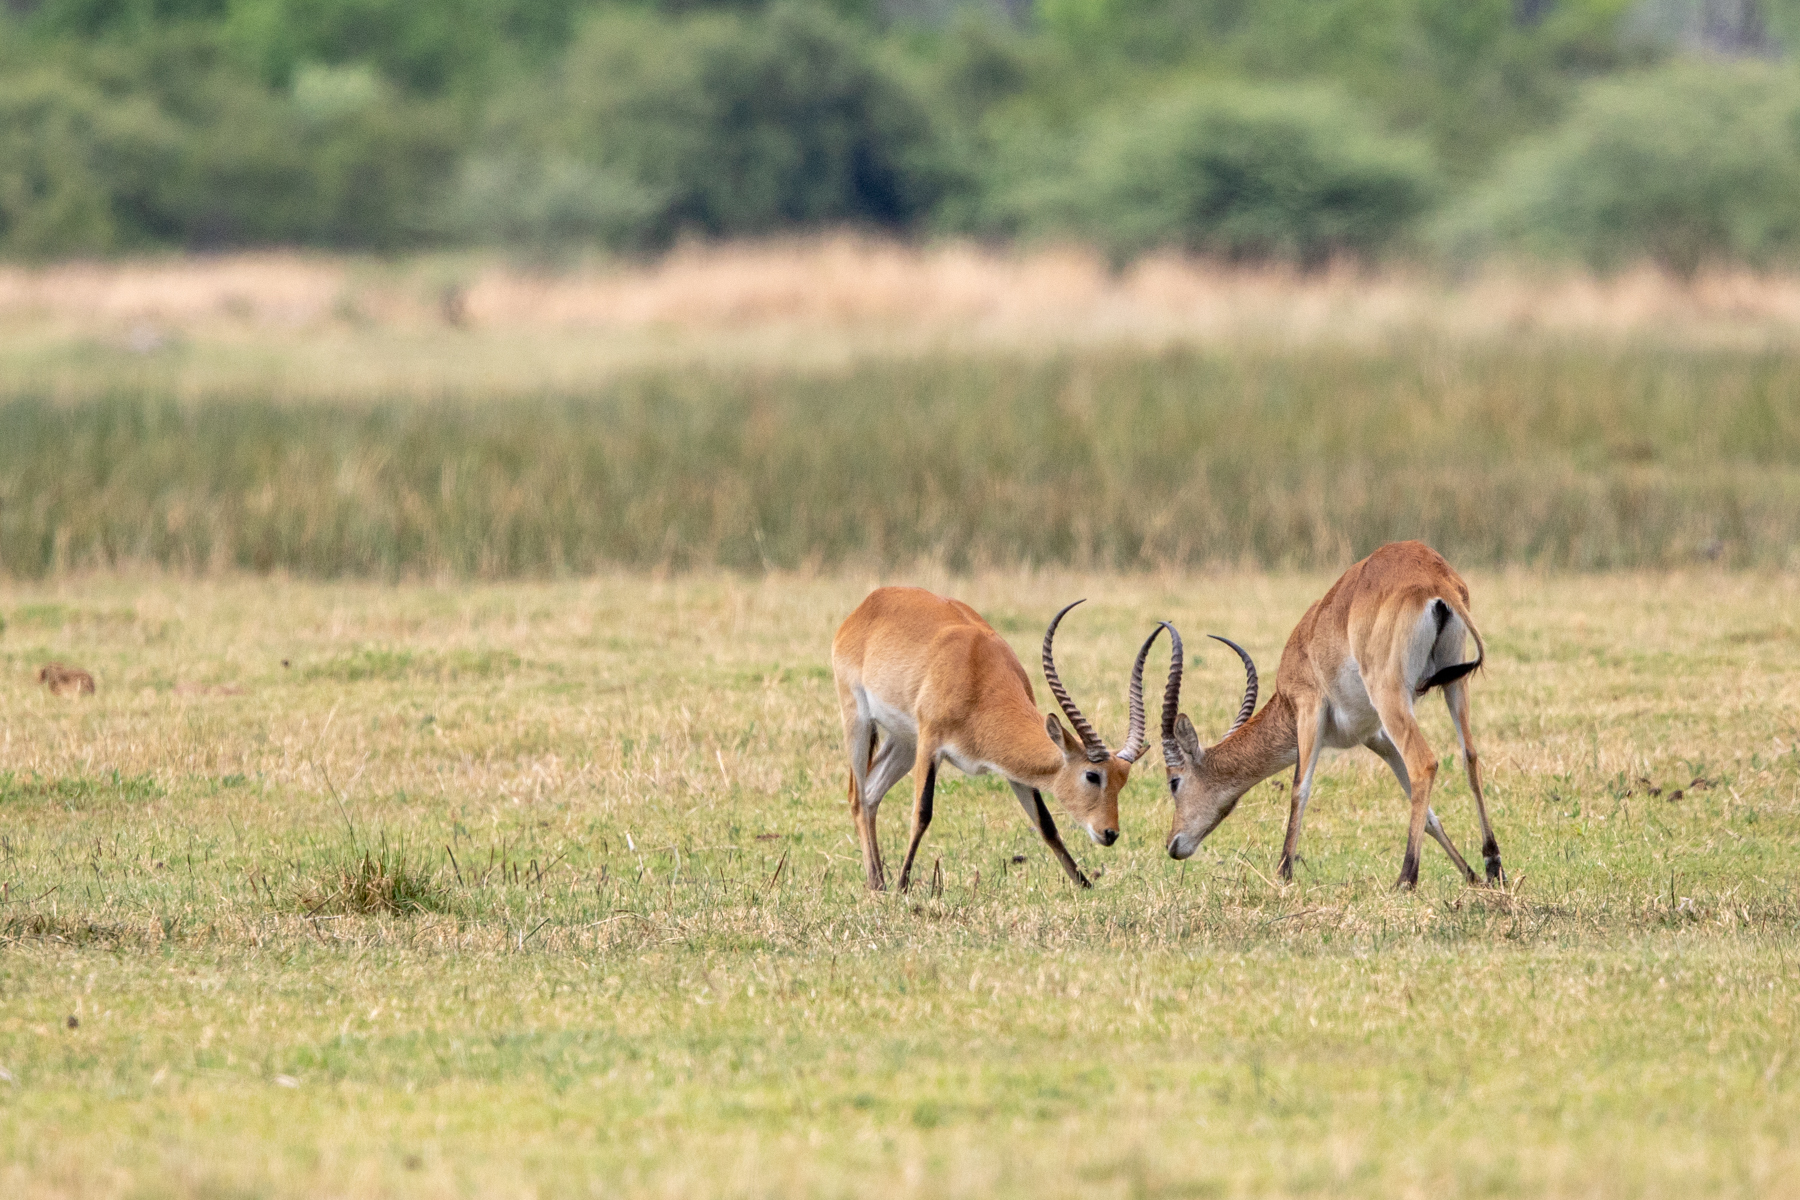 Male Red Lechwes sparring. Red Lechwe's are an antelope of seasonally-flooded grasslands bordering swamps